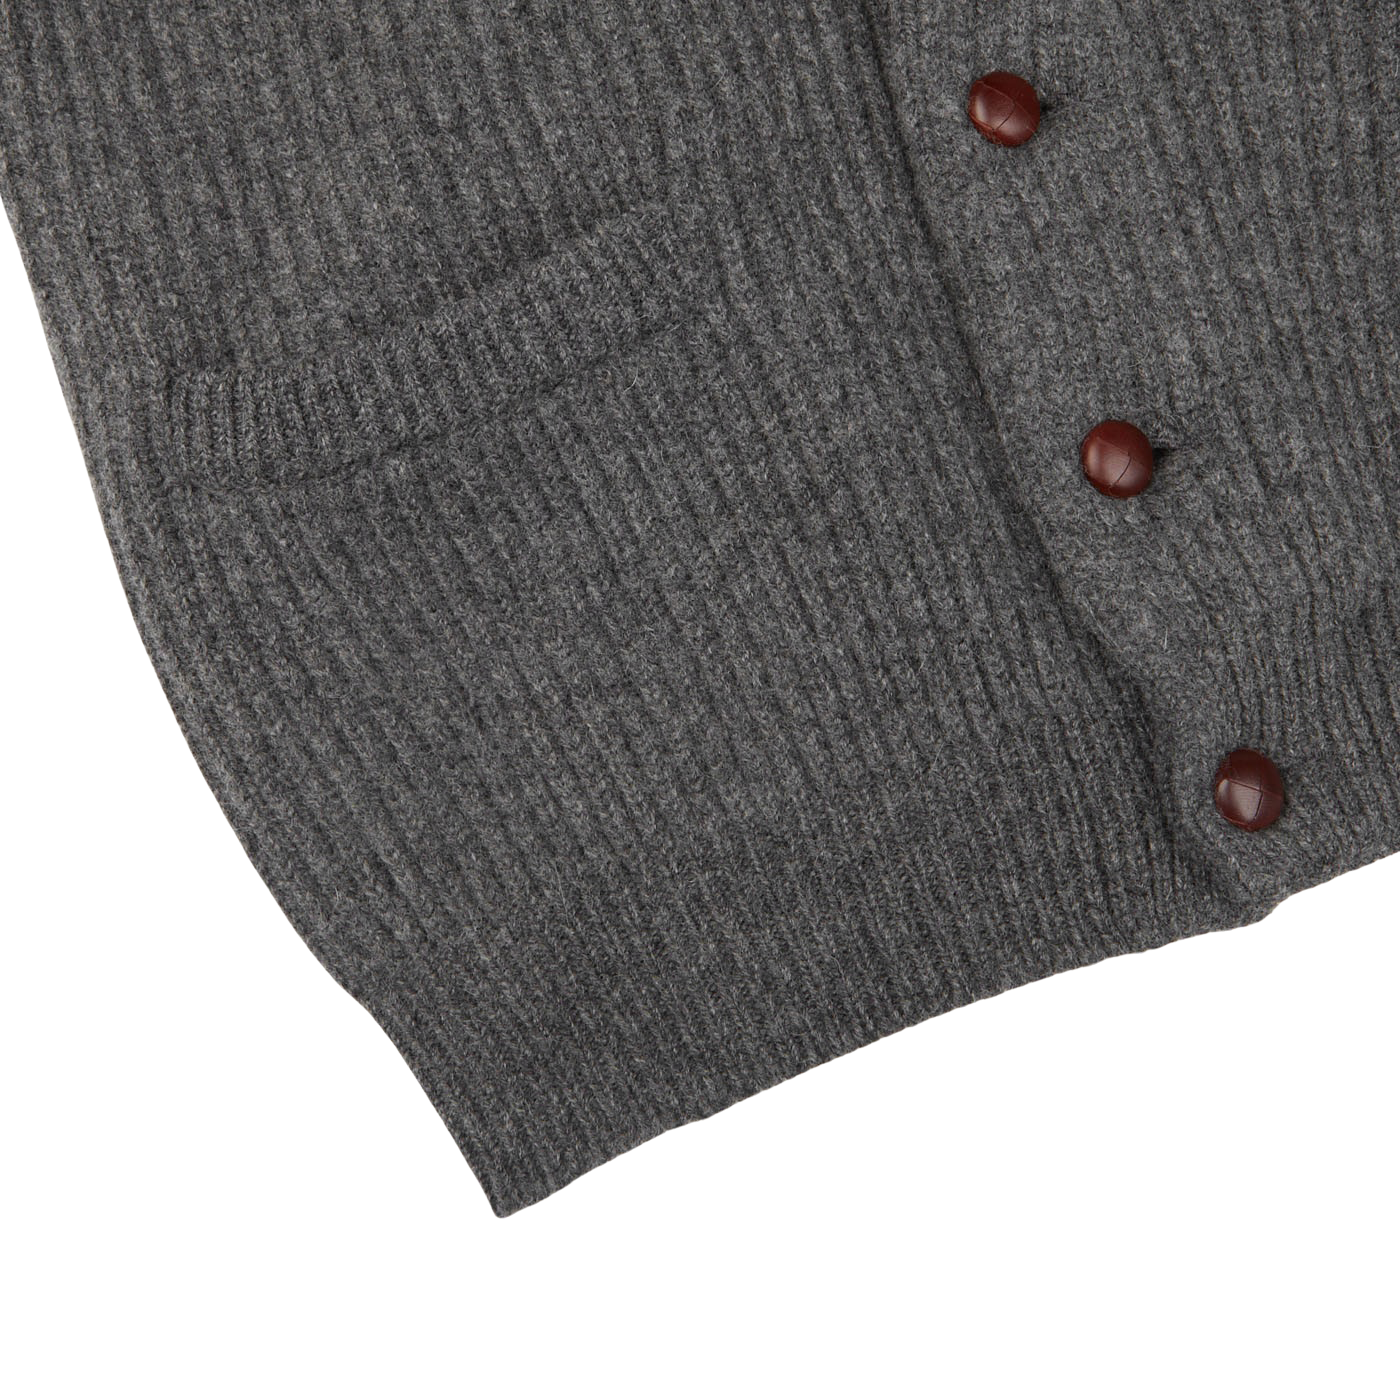 A William Lockie Cliff Grey Lambswool Shawl Collar Cardigan with leather buttons on the front.